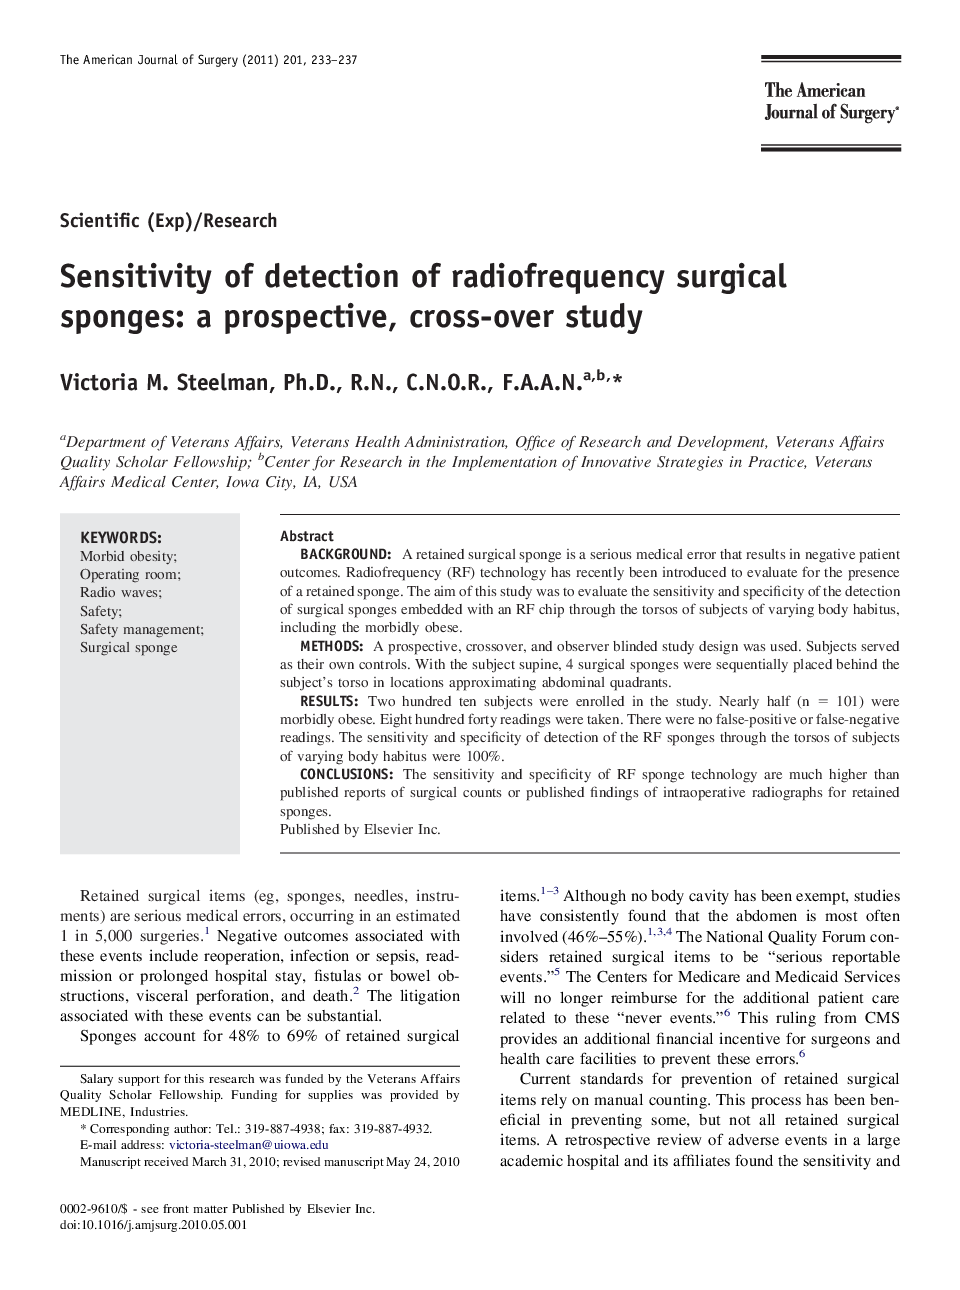 Sensitivity of detection of radiofrequency surgical sponges: a prospective, cross-over study 